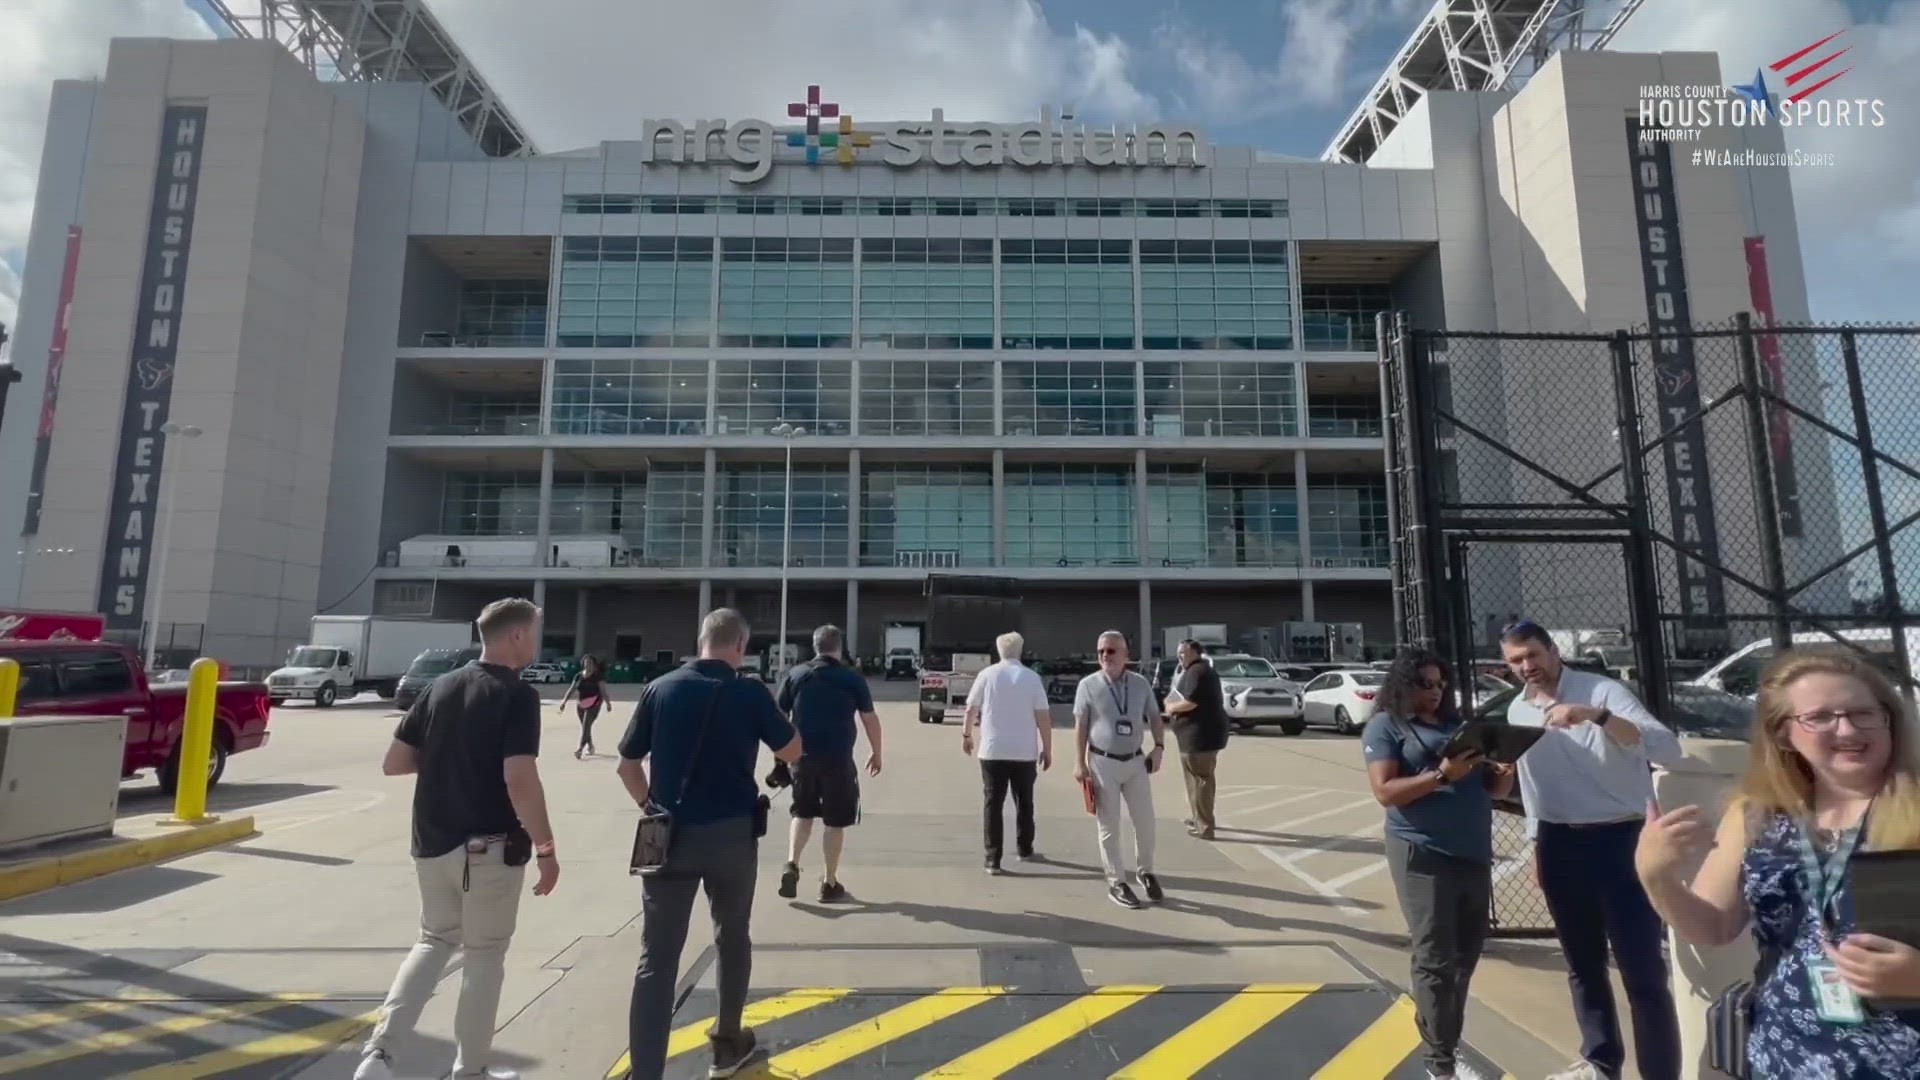 More than 30 officials attended meetings and took tours of NRG Stadium and the training facility where Houston is expected to host five to eight matches.